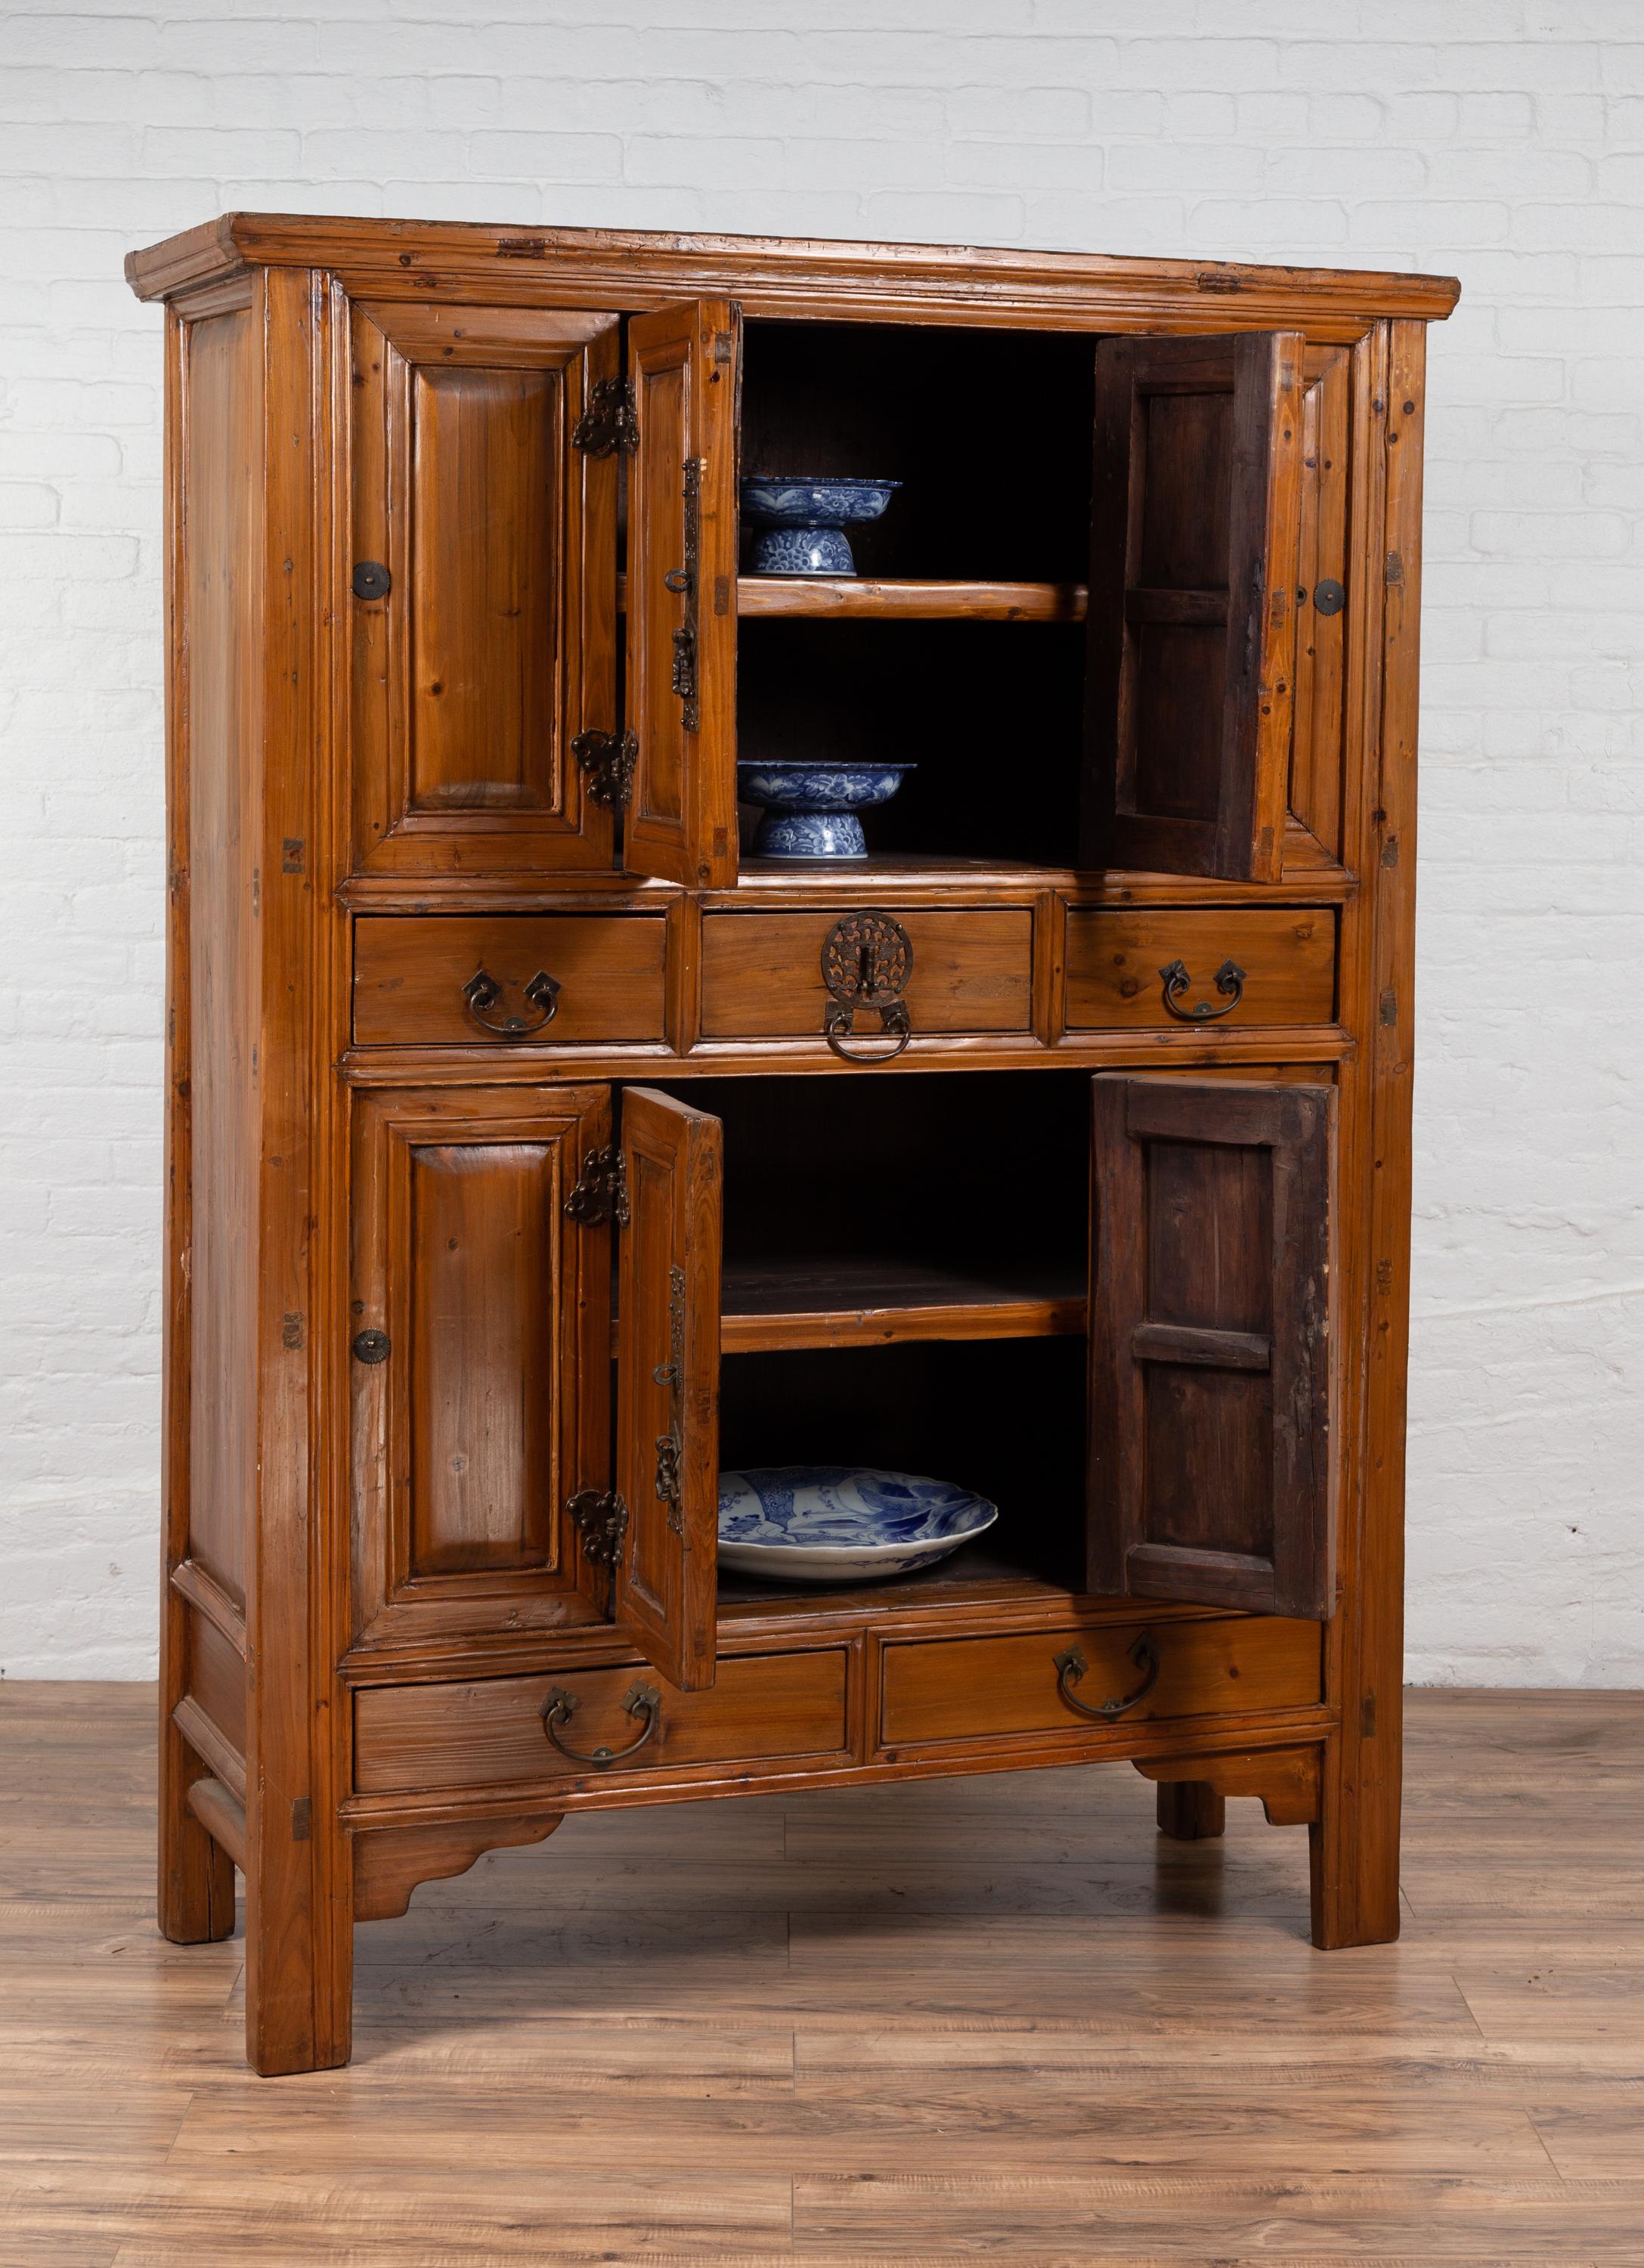 Large Chinese Qing Dynasty Style Wooden Cabinet with Paneled Doors and Drawers For Sale 10